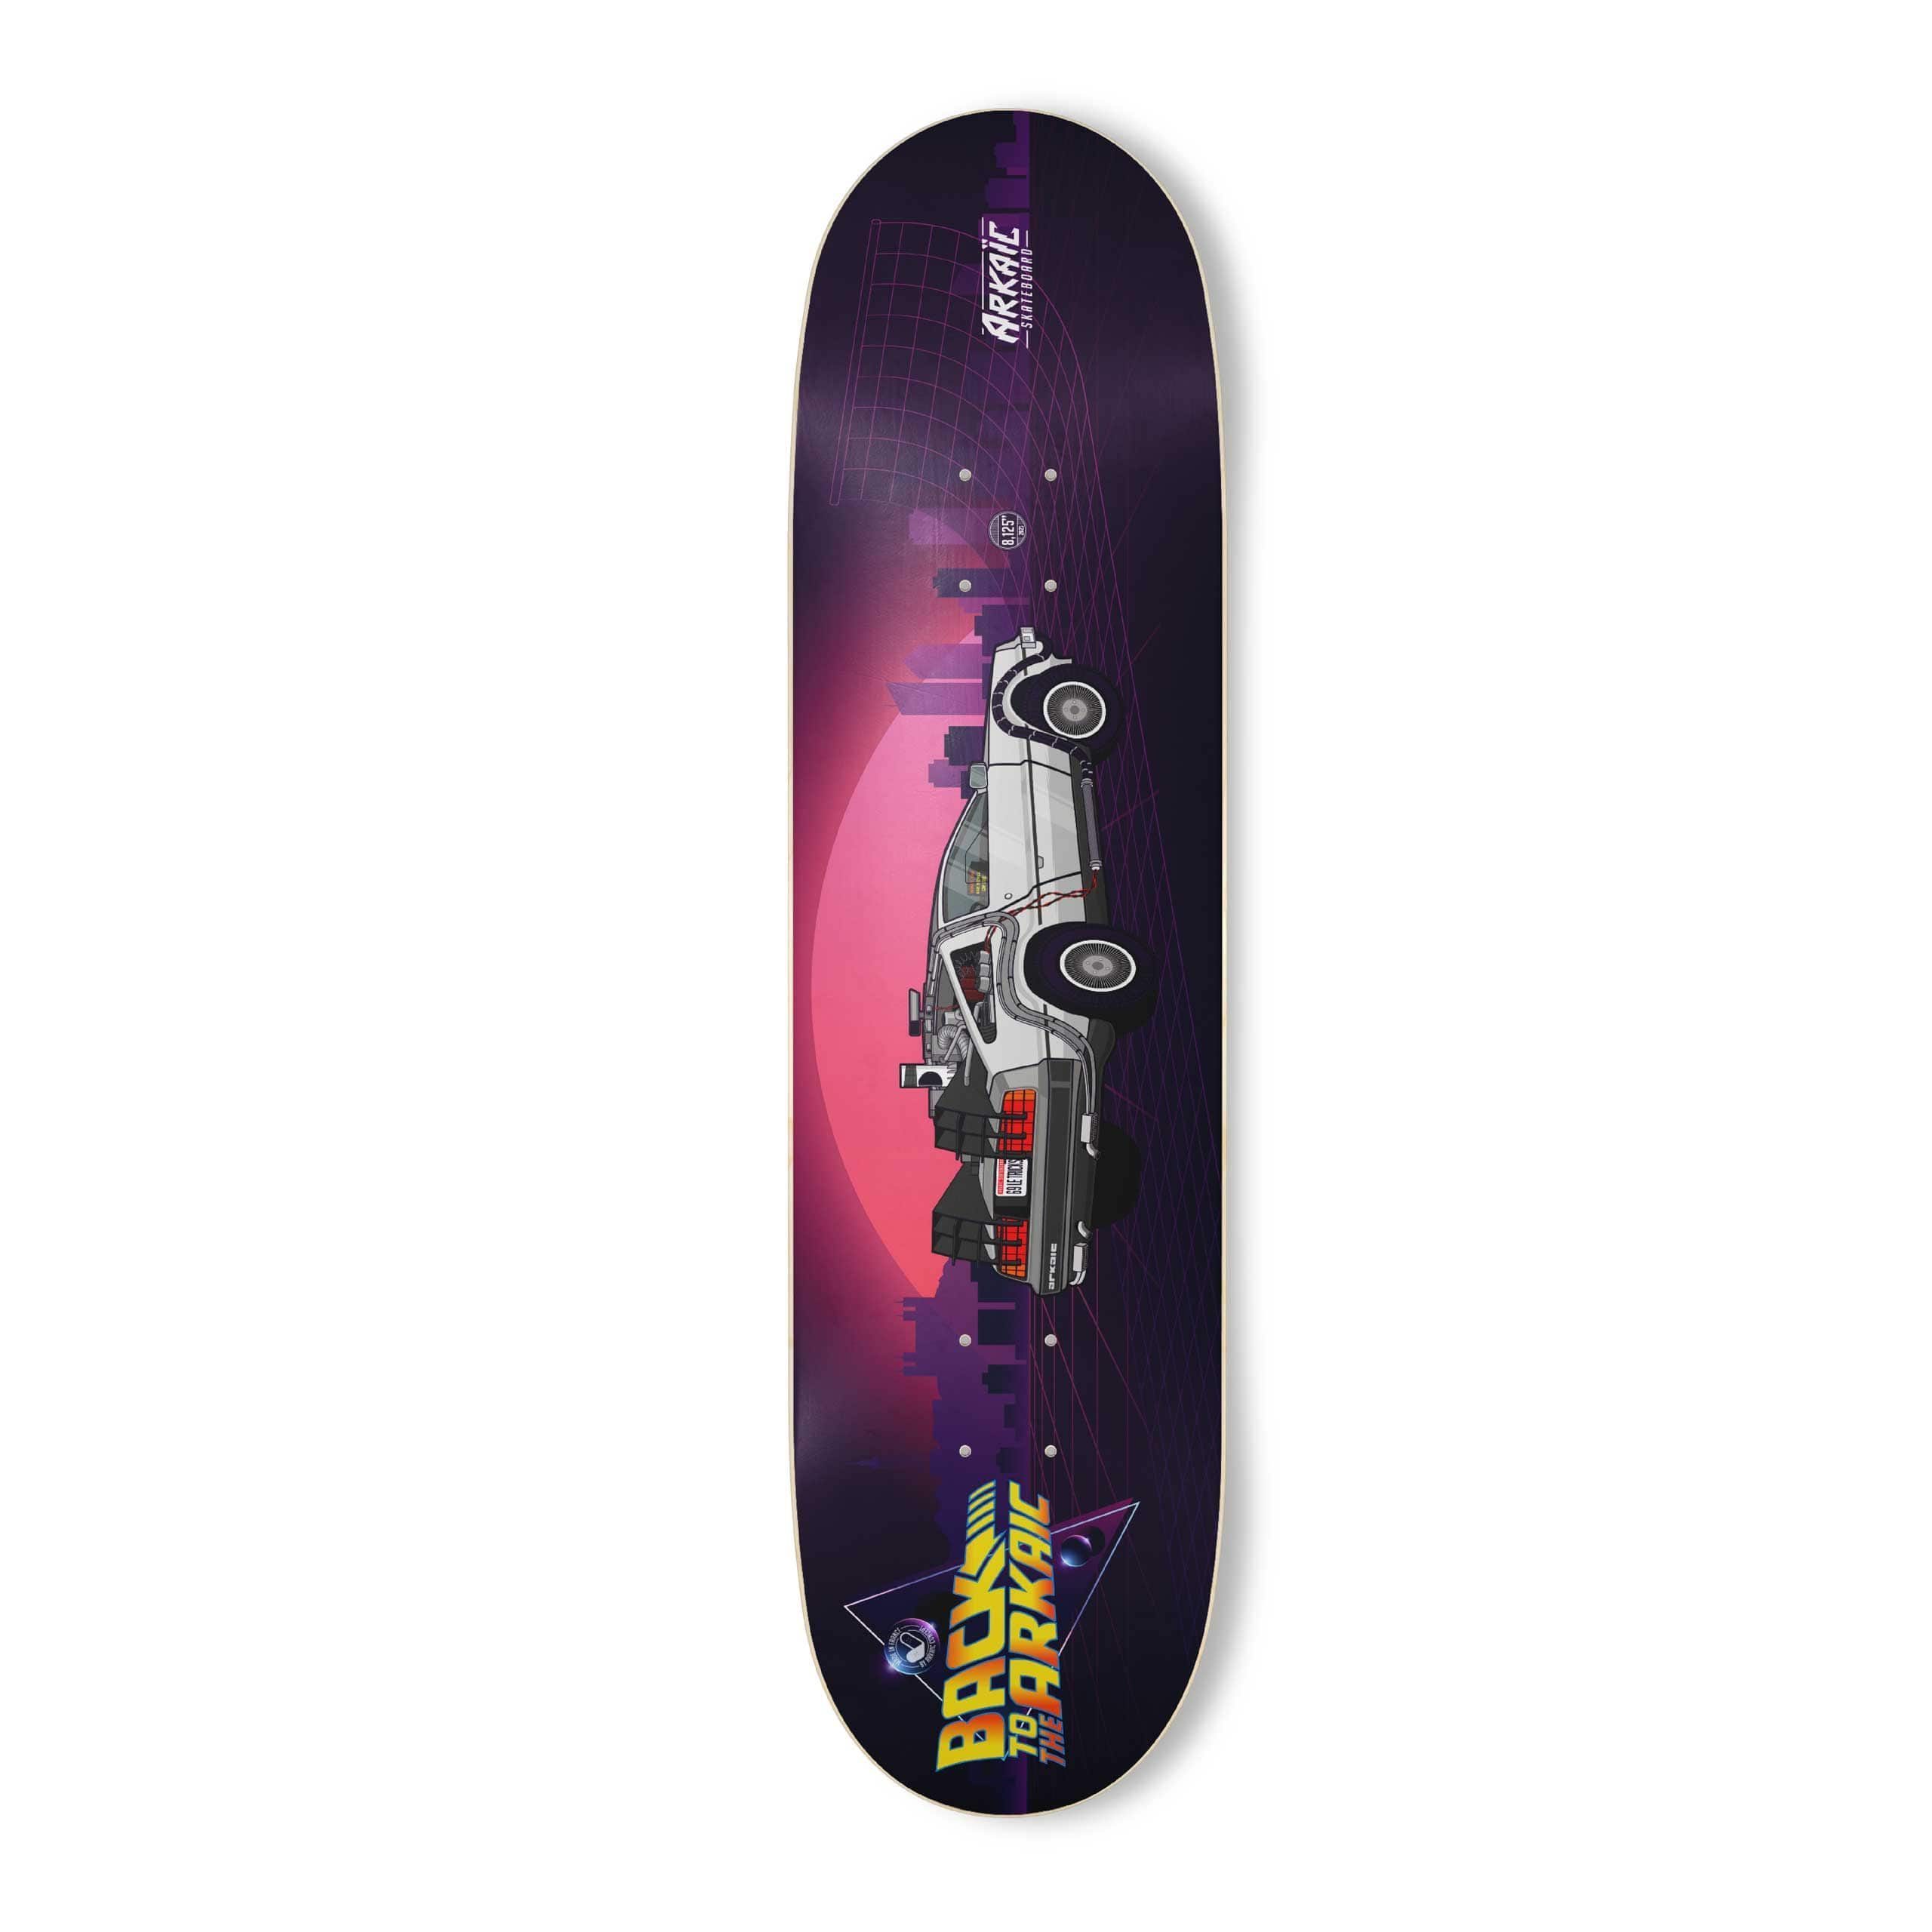 back to Arkaic 8,125 Arkaic skateboard made in France 2023